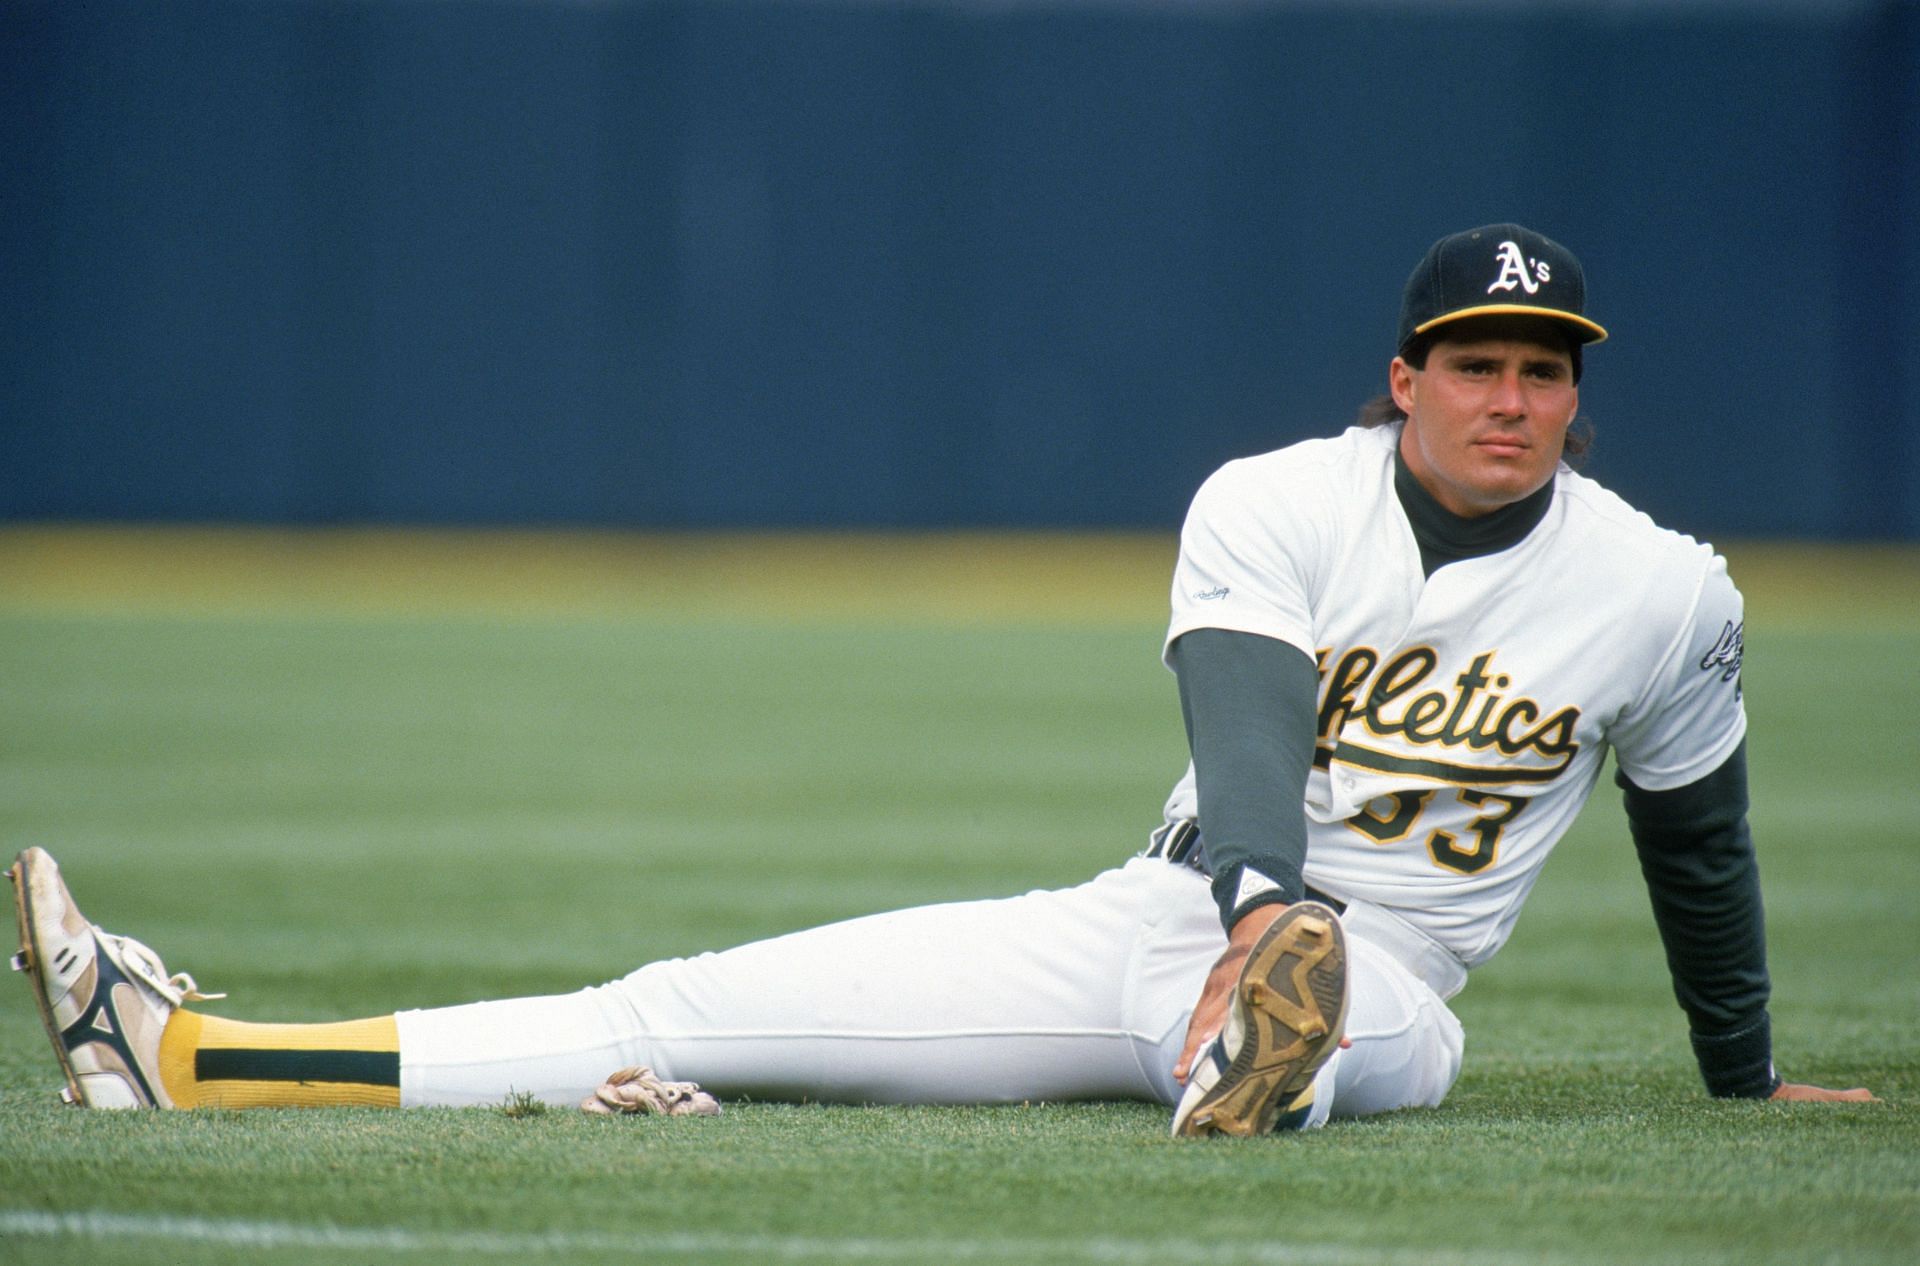 When former Oakland Athletics star Jose Canseco's fortune vanished  following two dramatic divorces